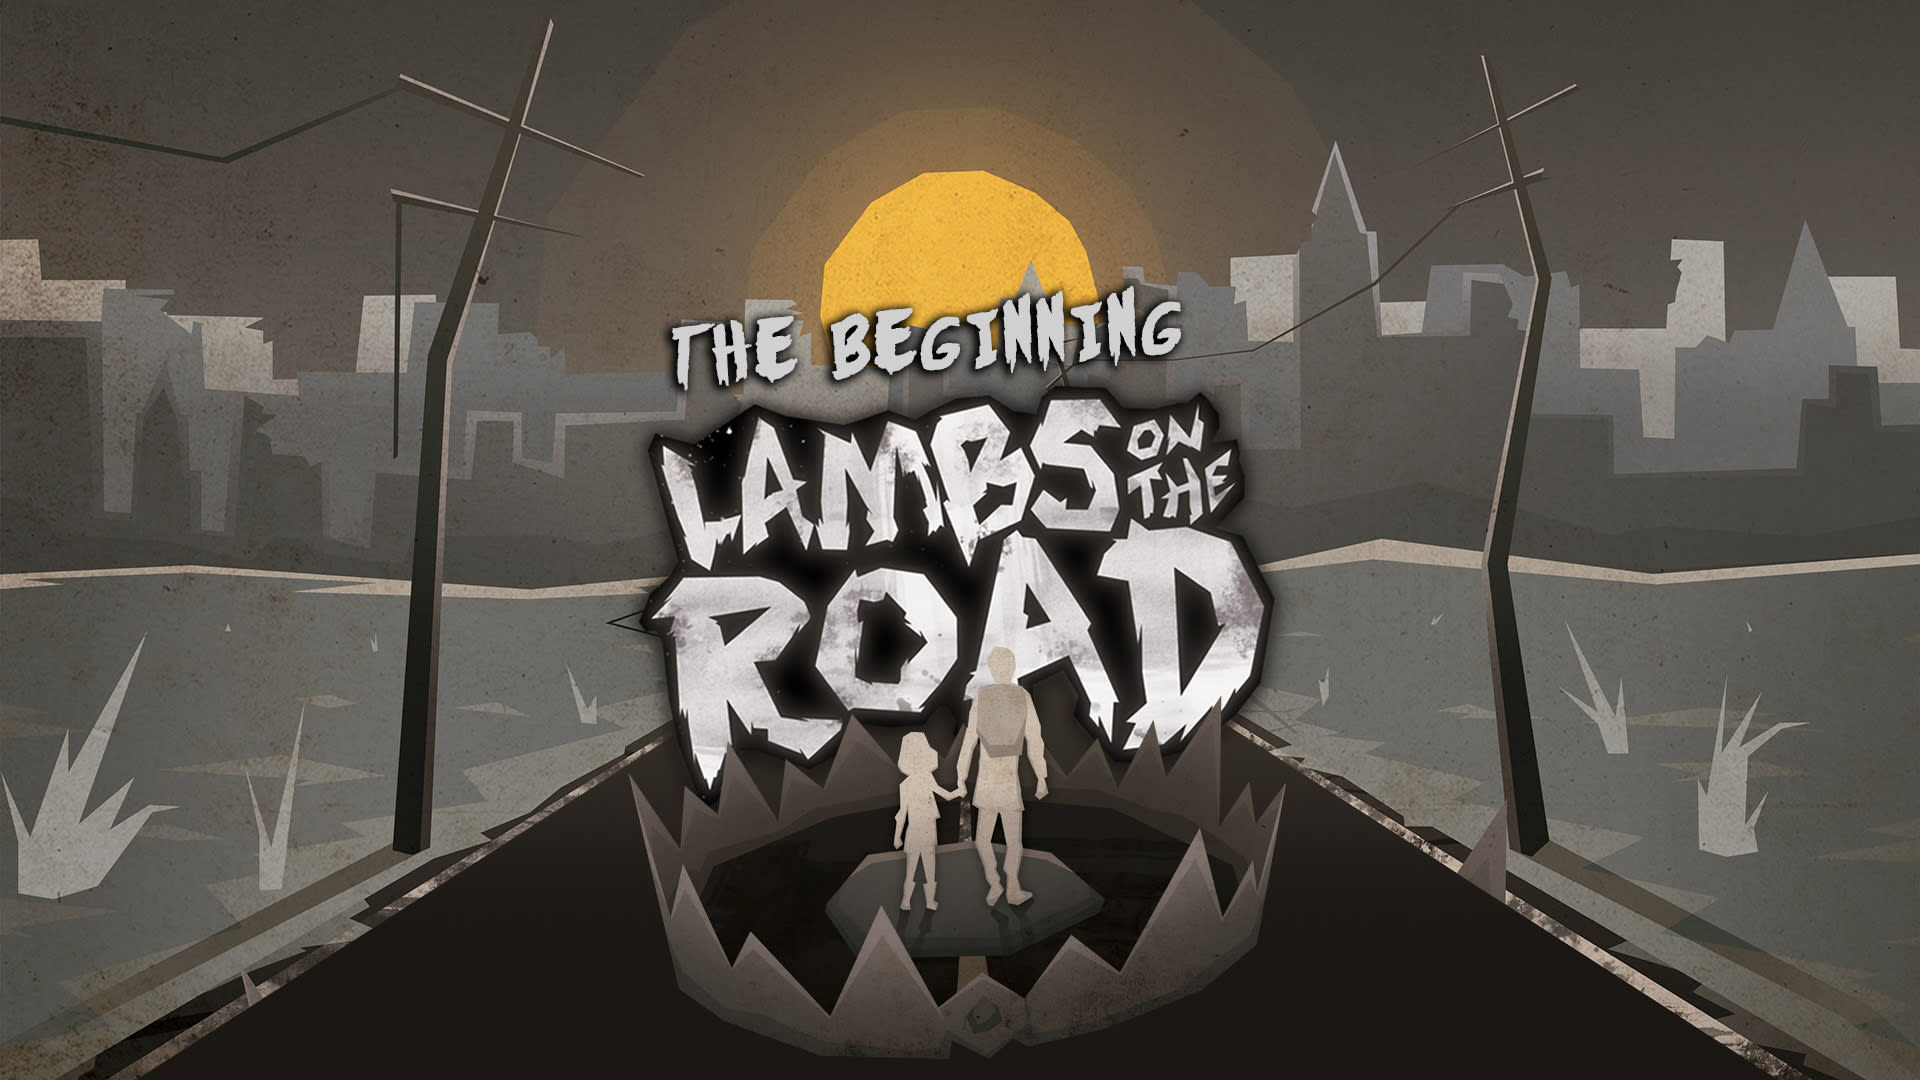 Lambs on the road : The Beginning 1